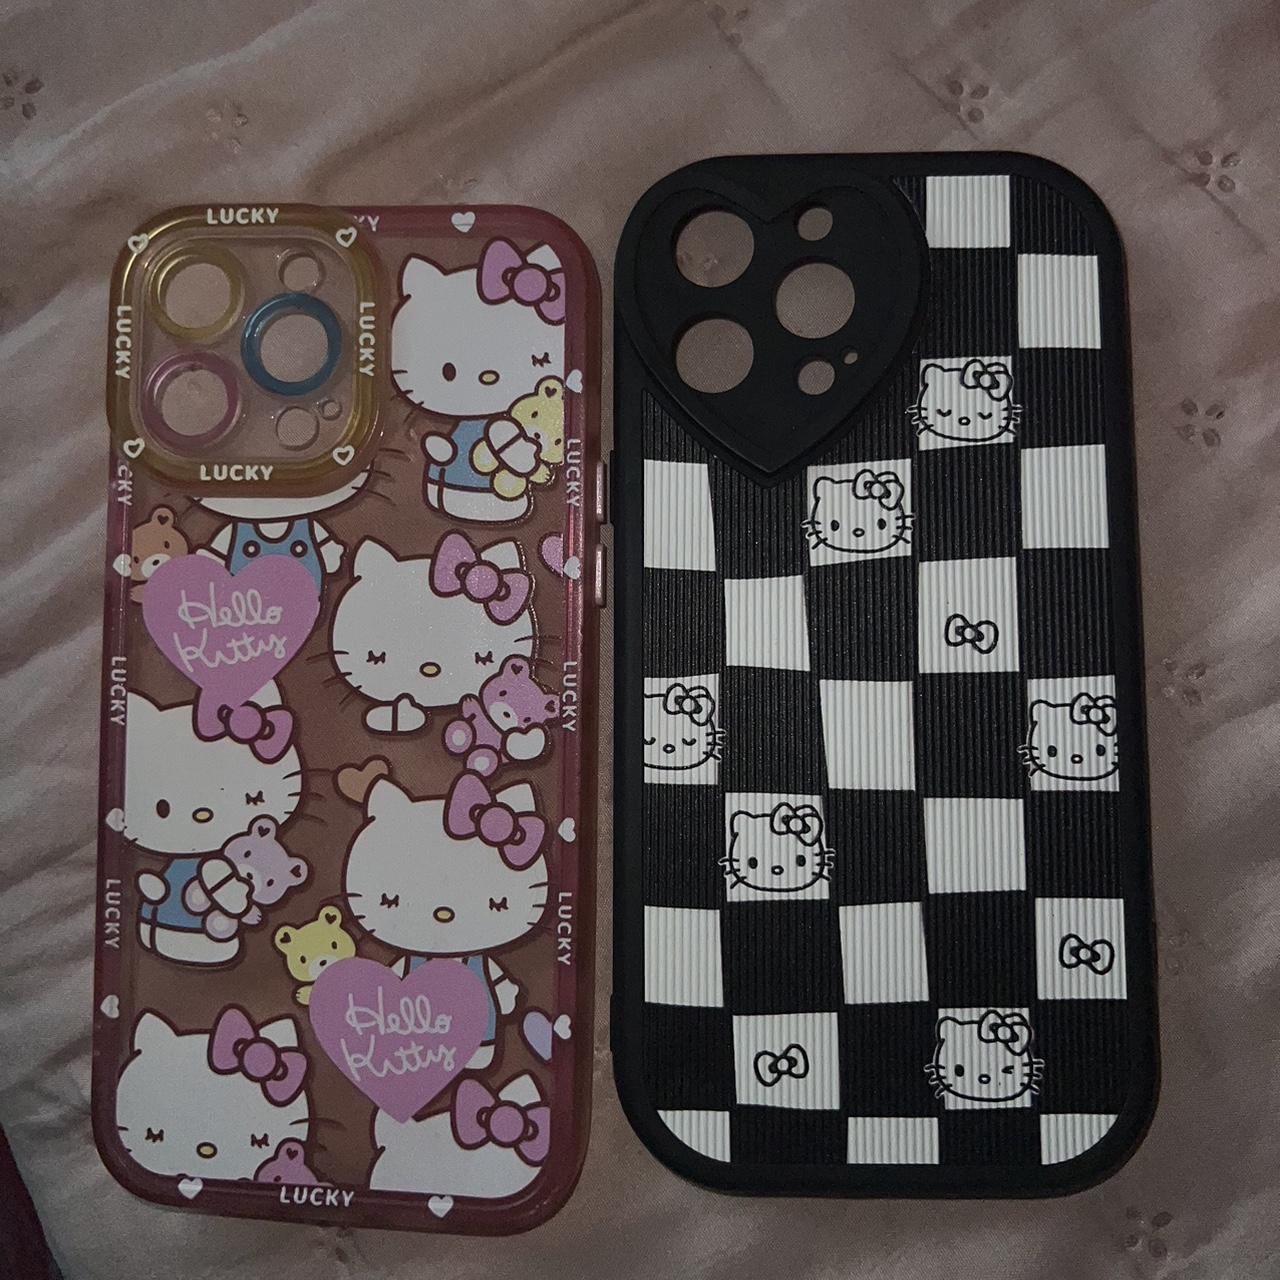 LOUIS VUITTON LV PATTERN LOGO HELLO KITTY iPhone 12 Pro Max Case Cover